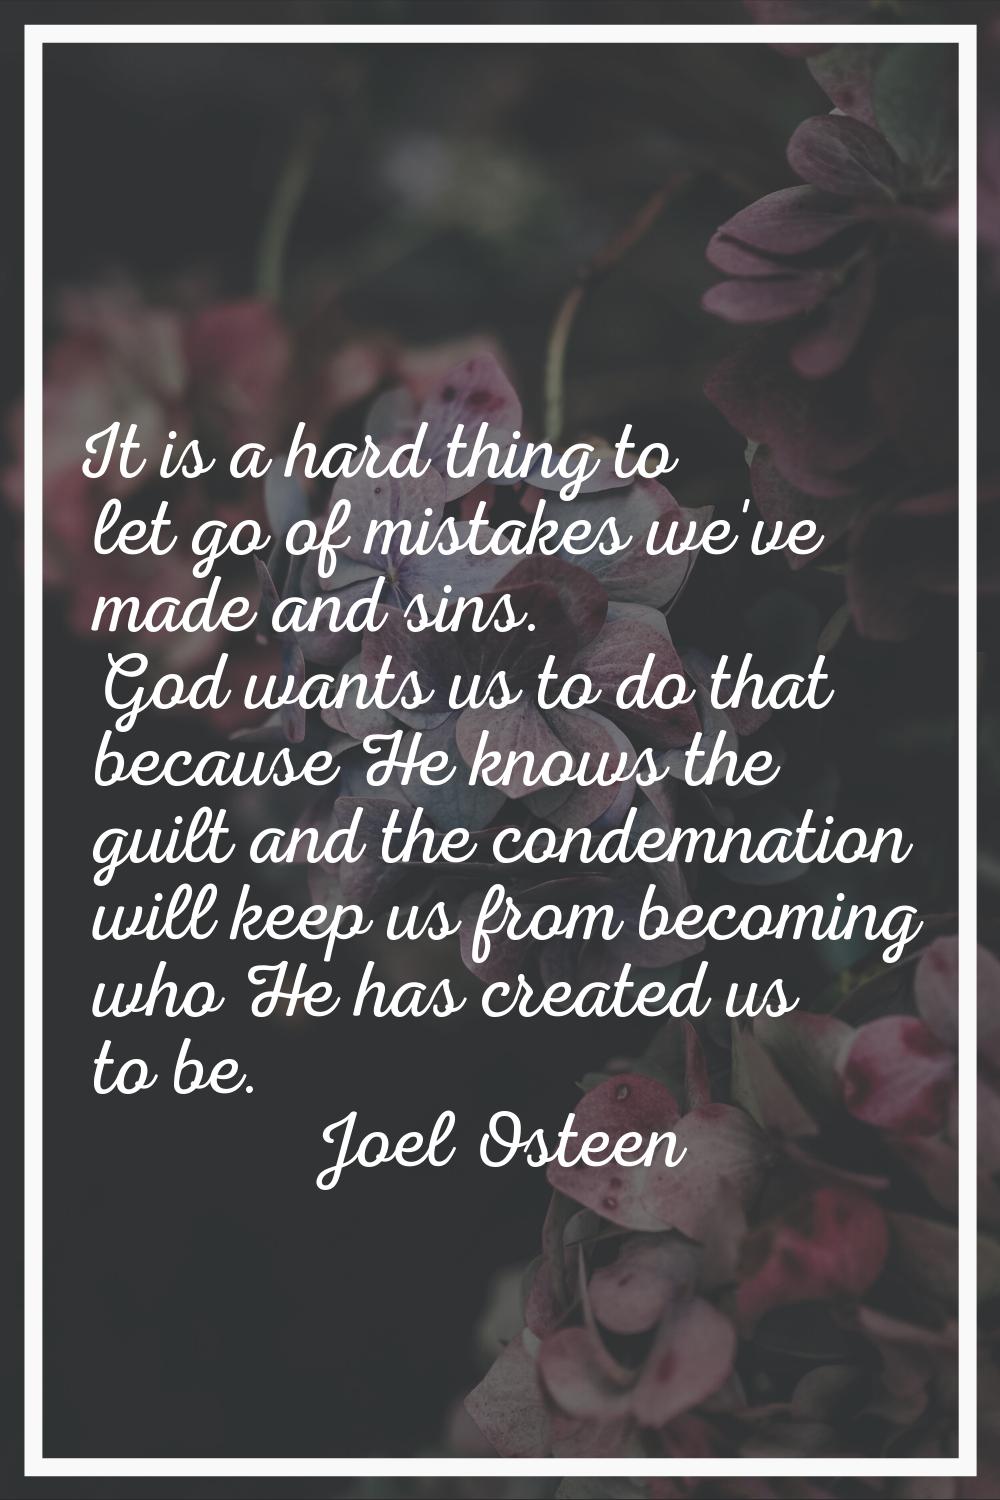 It is a hard thing to let go of mistakes we've made and sins. God wants us to do that because He kn